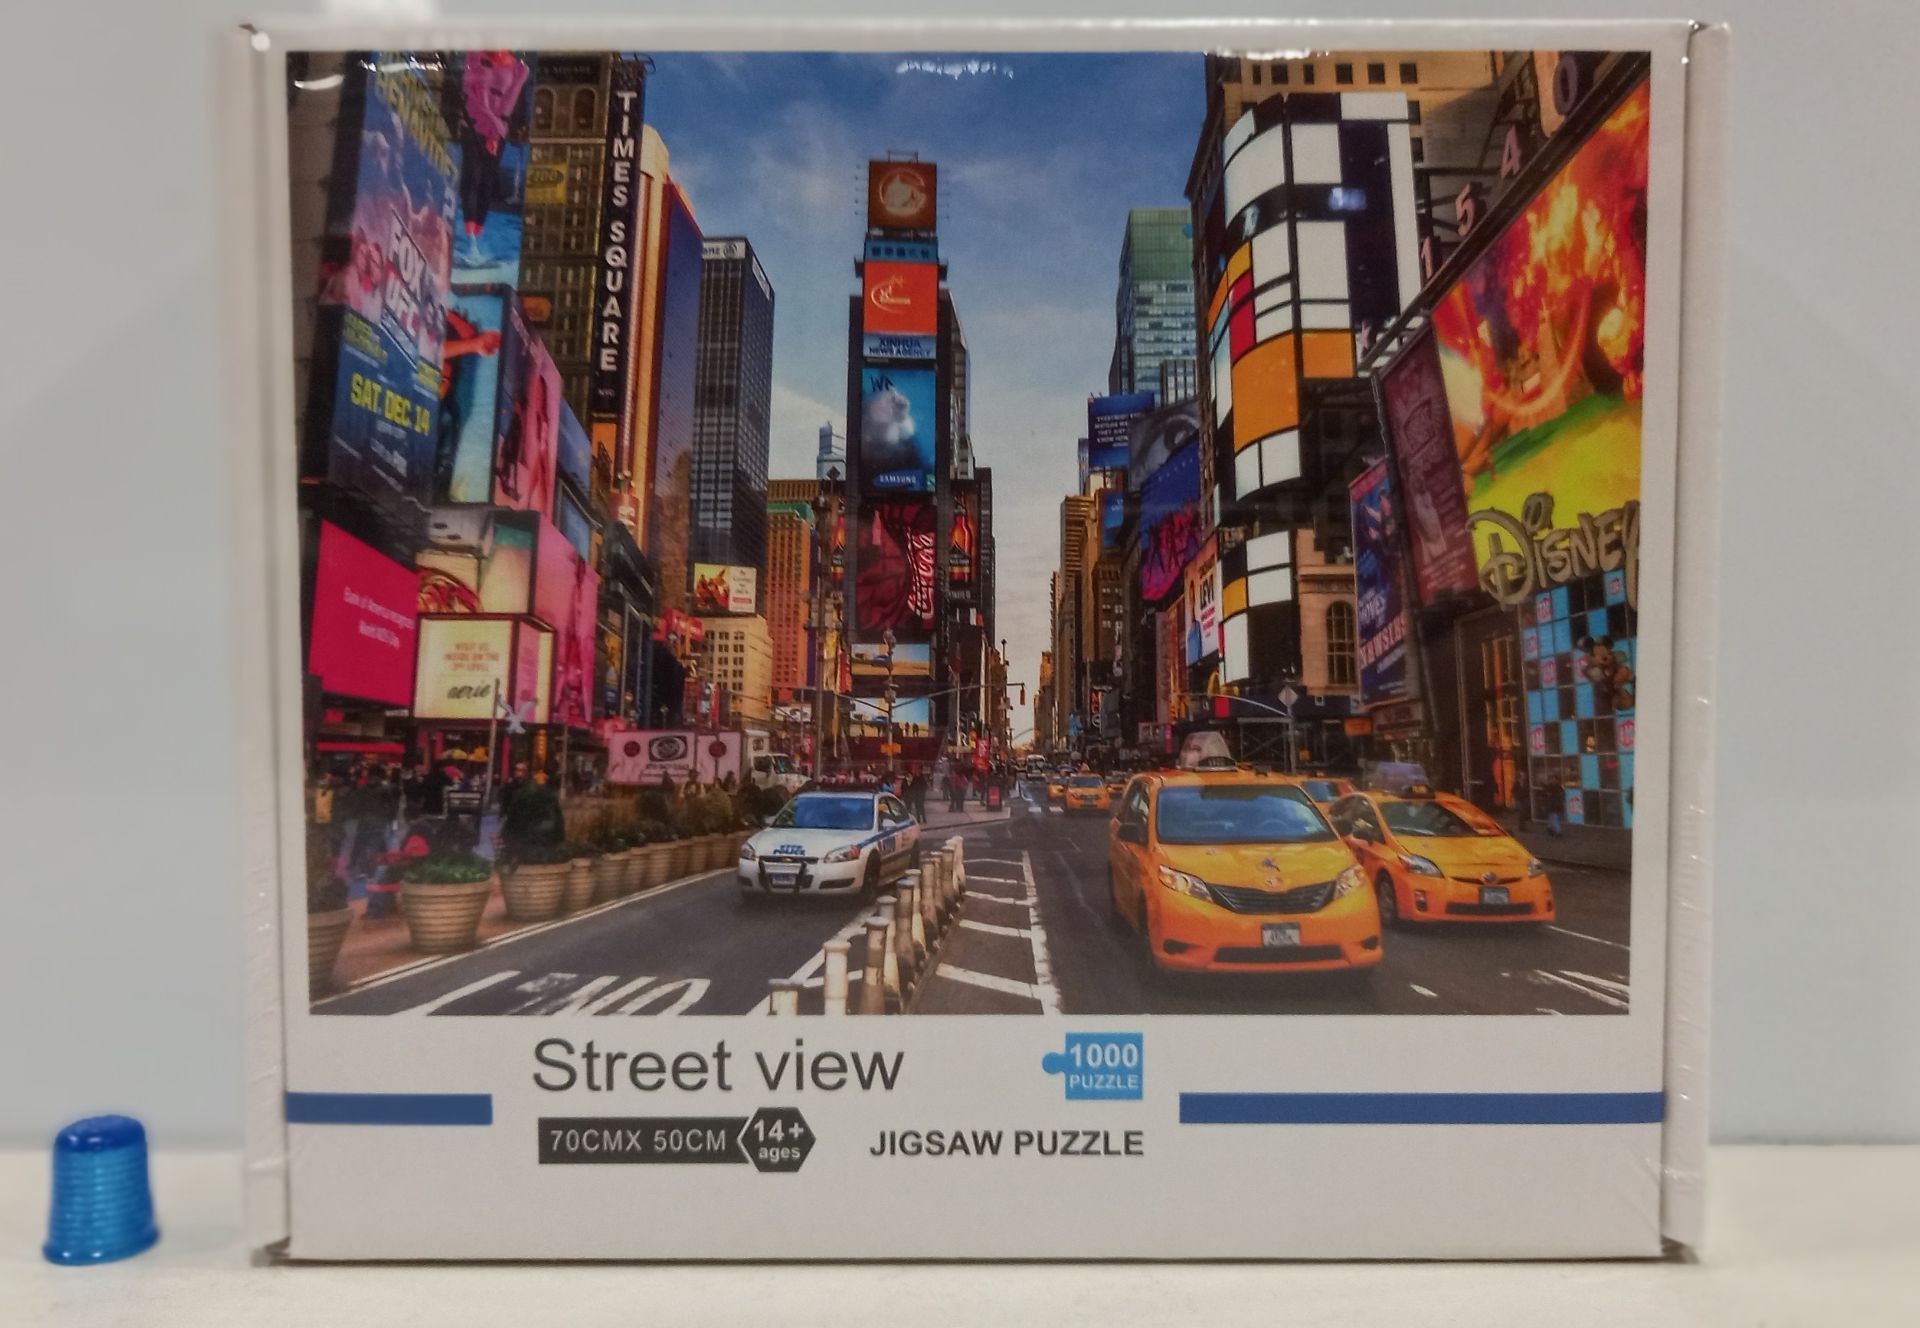 32 X BRAND NEW 1000 PC JIGSAW SETS - STREET VIEW (NY TIMES SQUARE) DESIGN - IN ONE OUTER CARTON